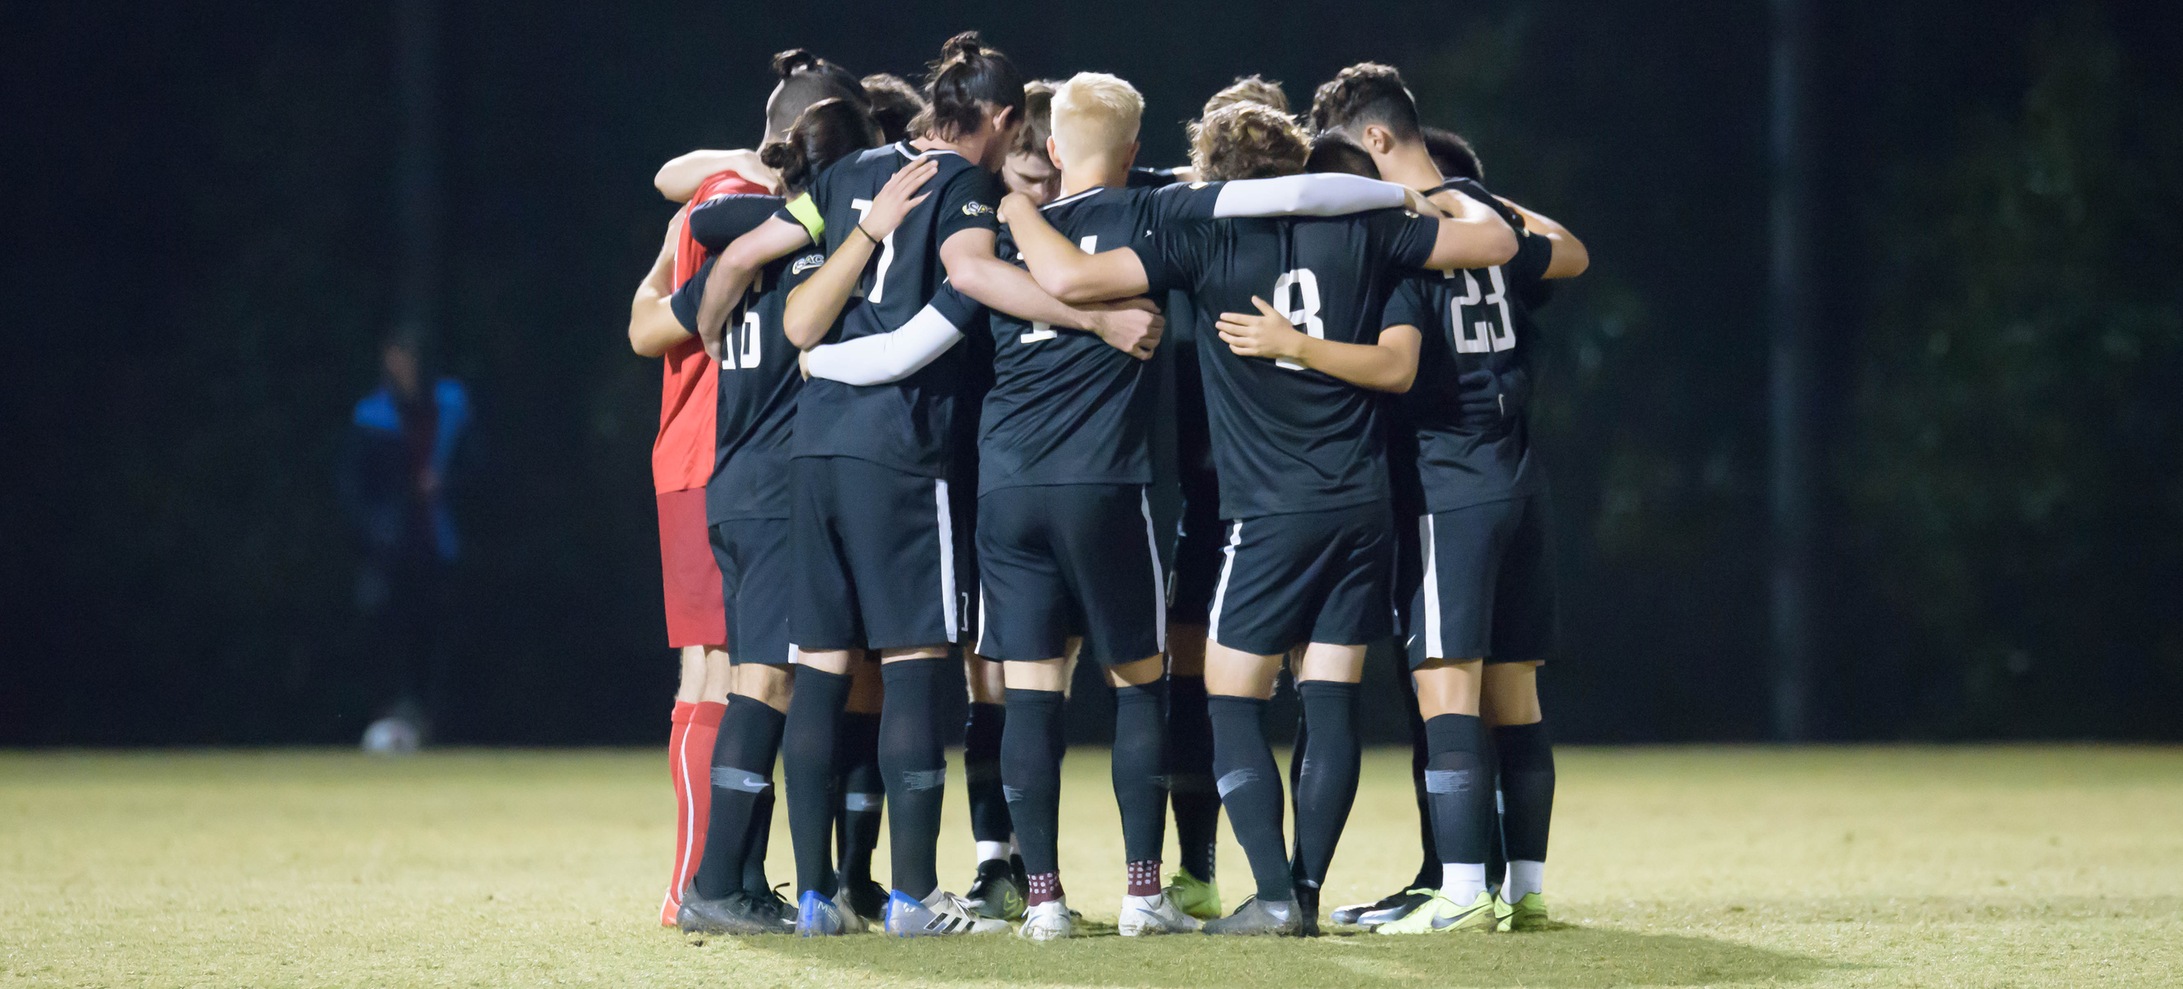 Men’s Soccer is Set to Take on No. 2 Seed Lander in NCAA Tournament